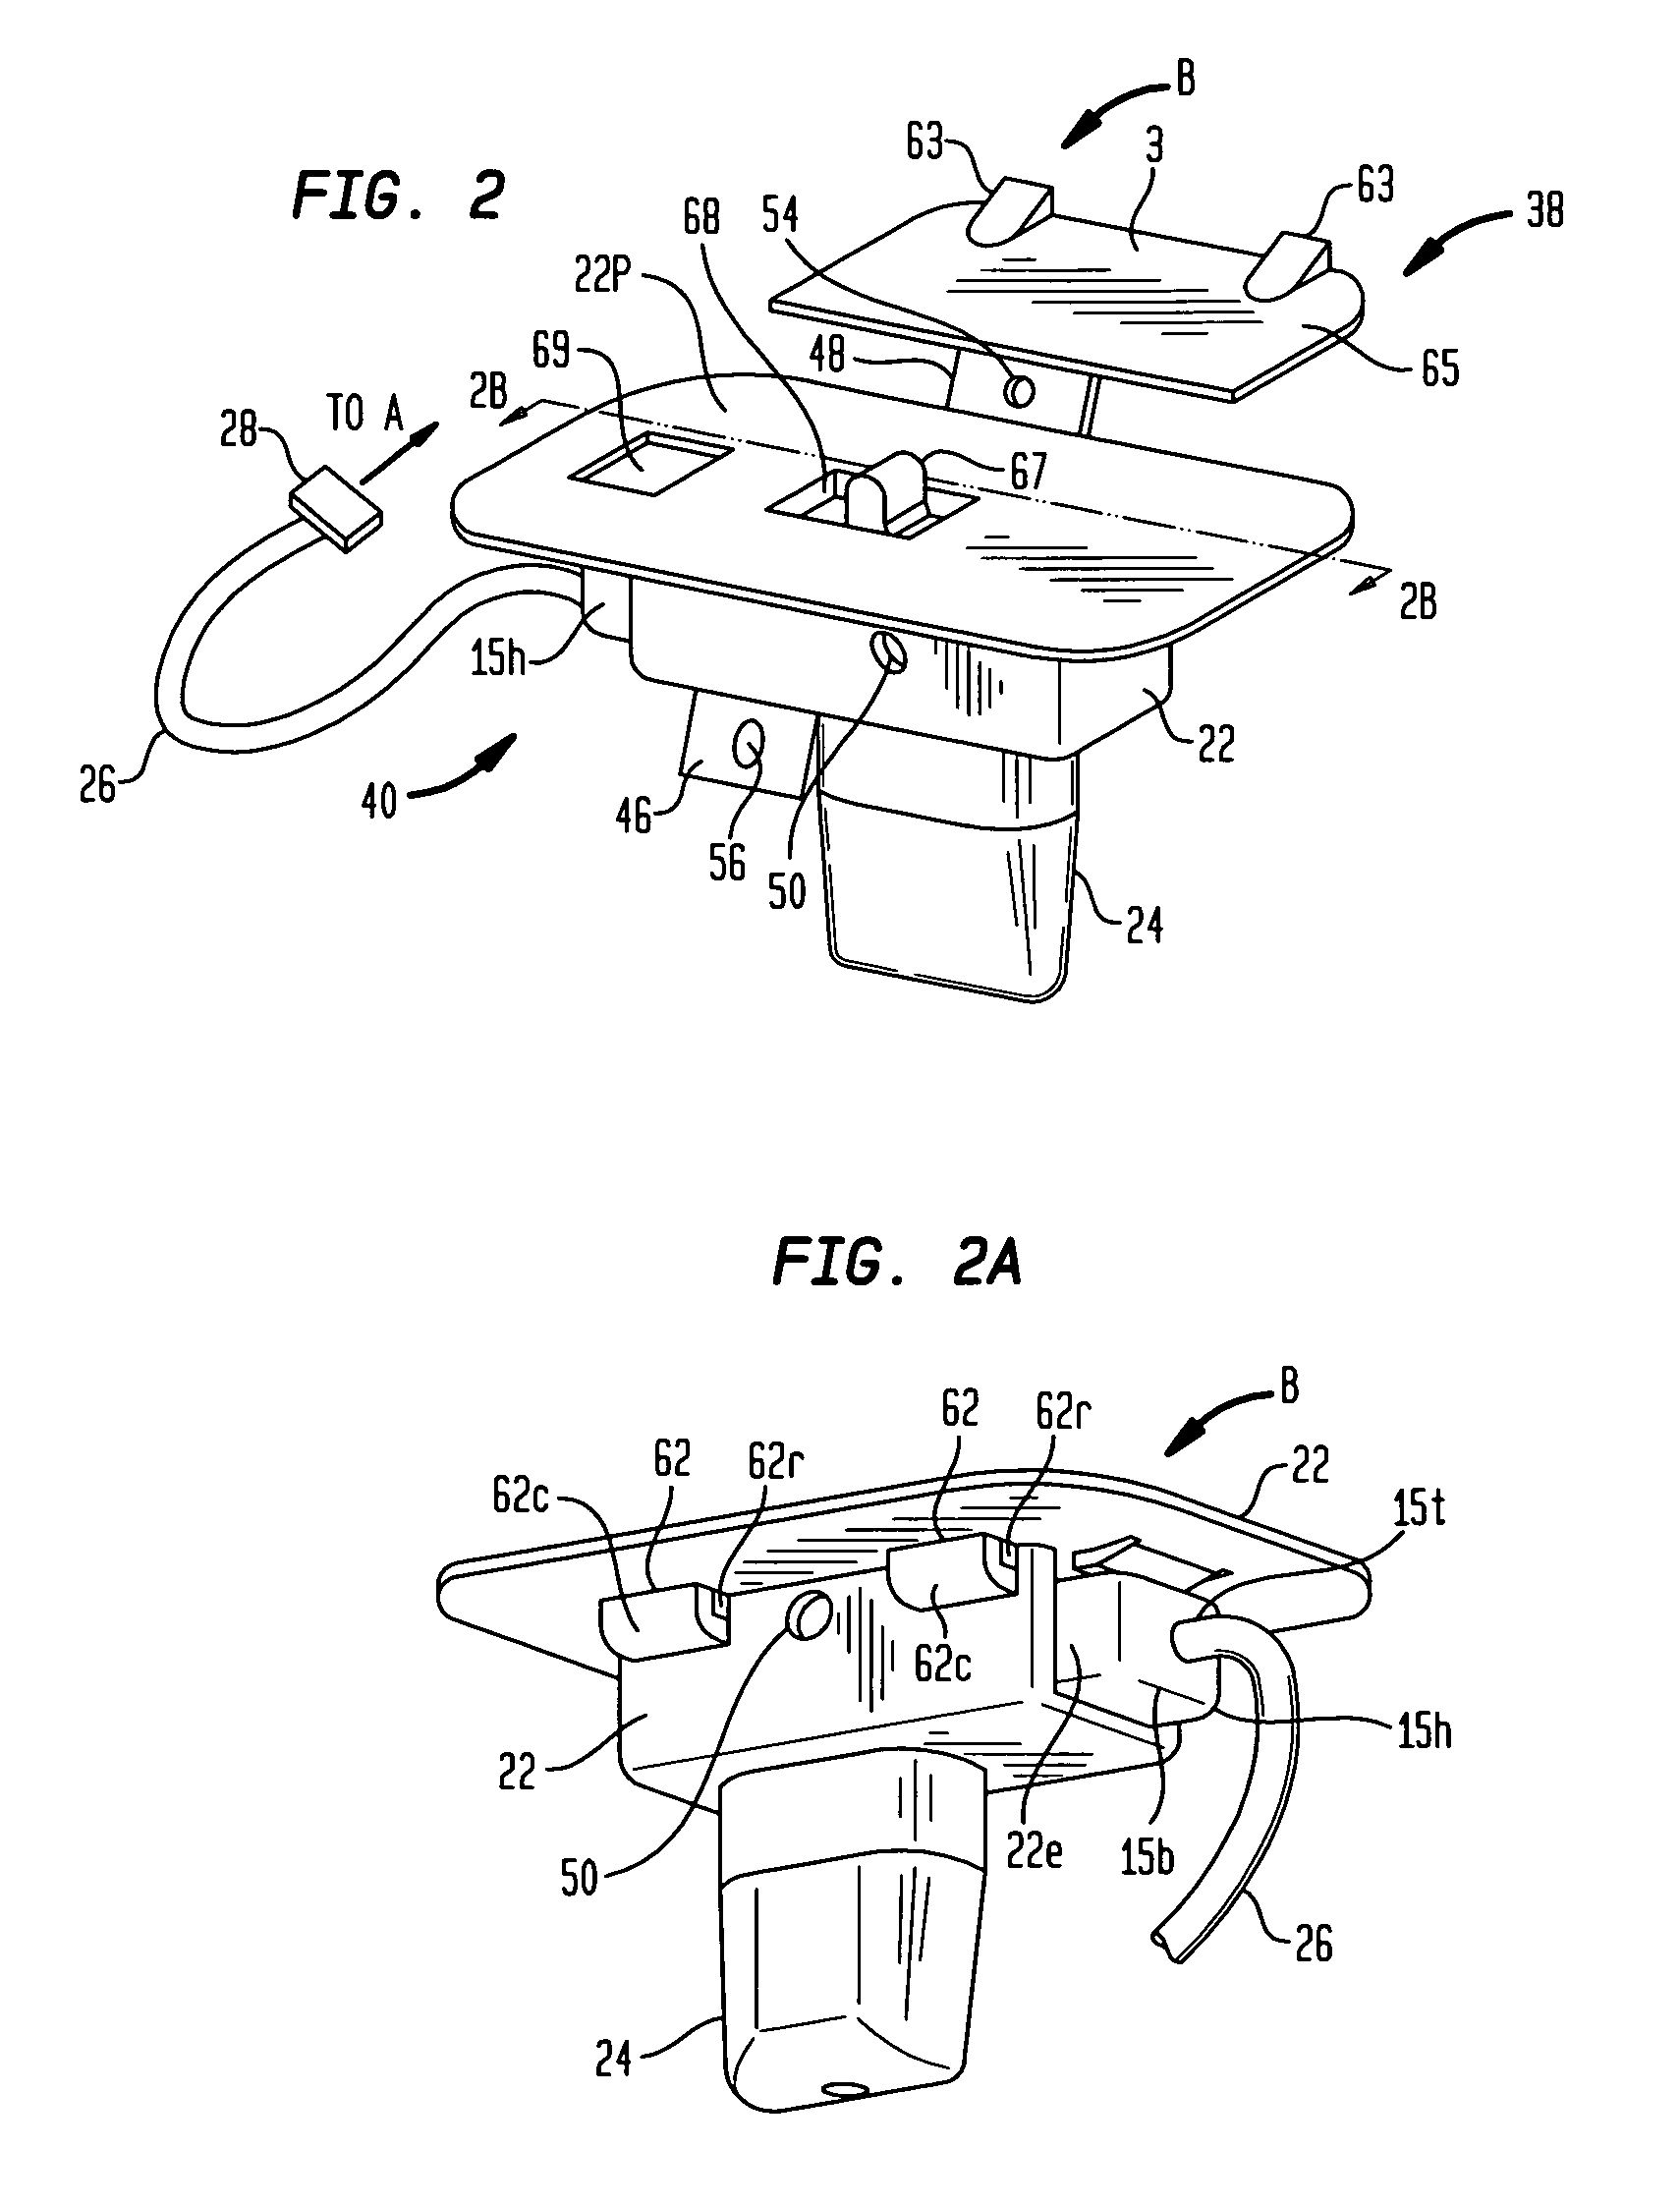 Apparatus for secure display, interactive delivery of product information and charging of battery-operated hand held electronic devices